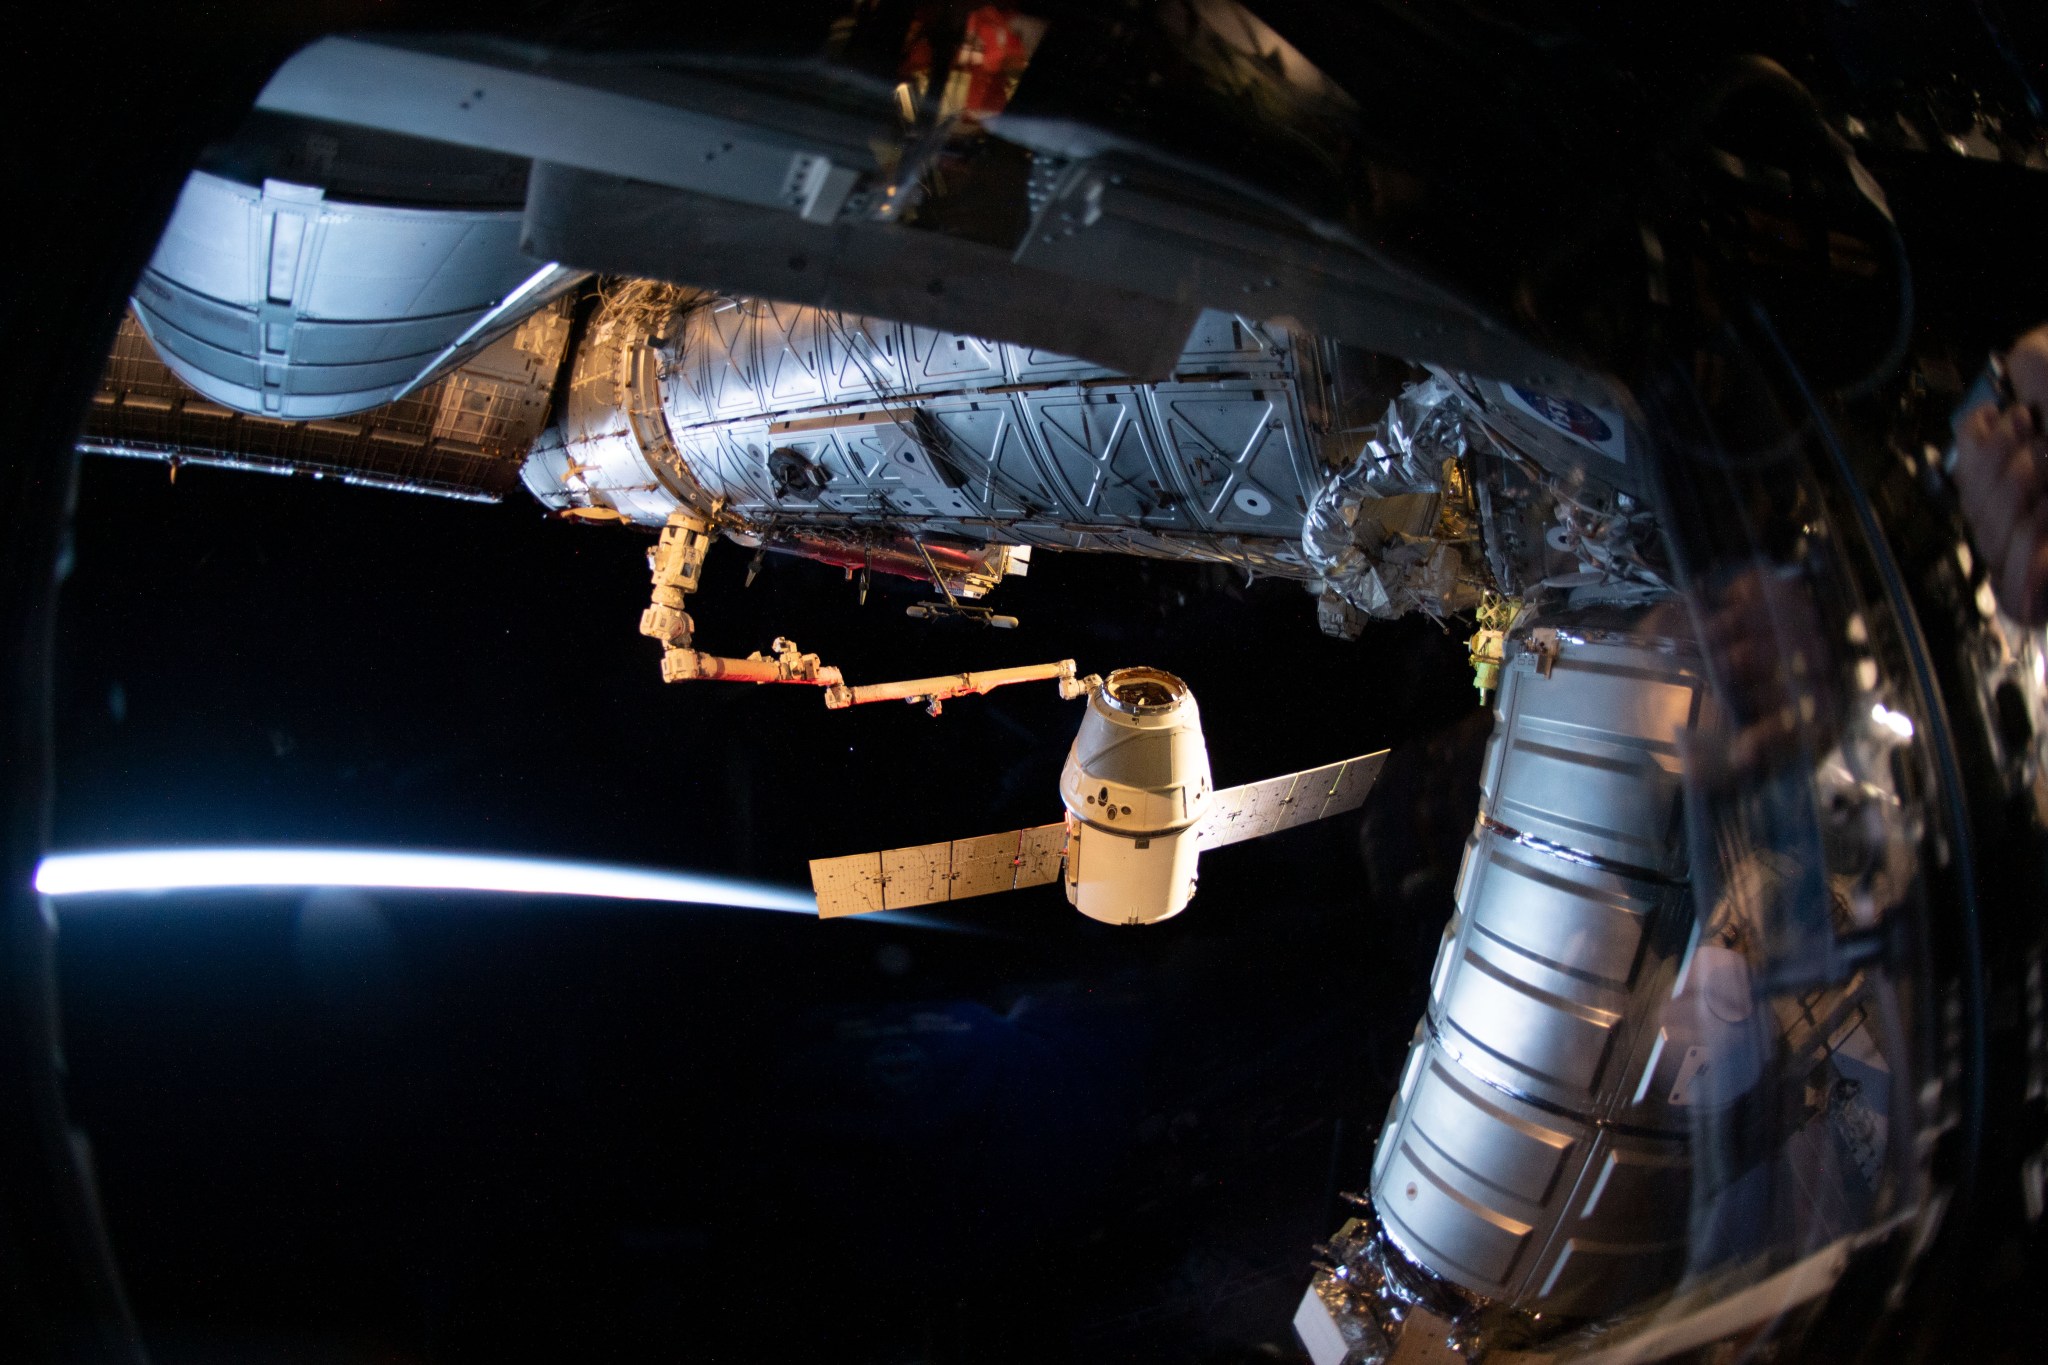 The SpaceX Dragon cargo craft on its 17th contracted mission to resupply mission to the International Space Station